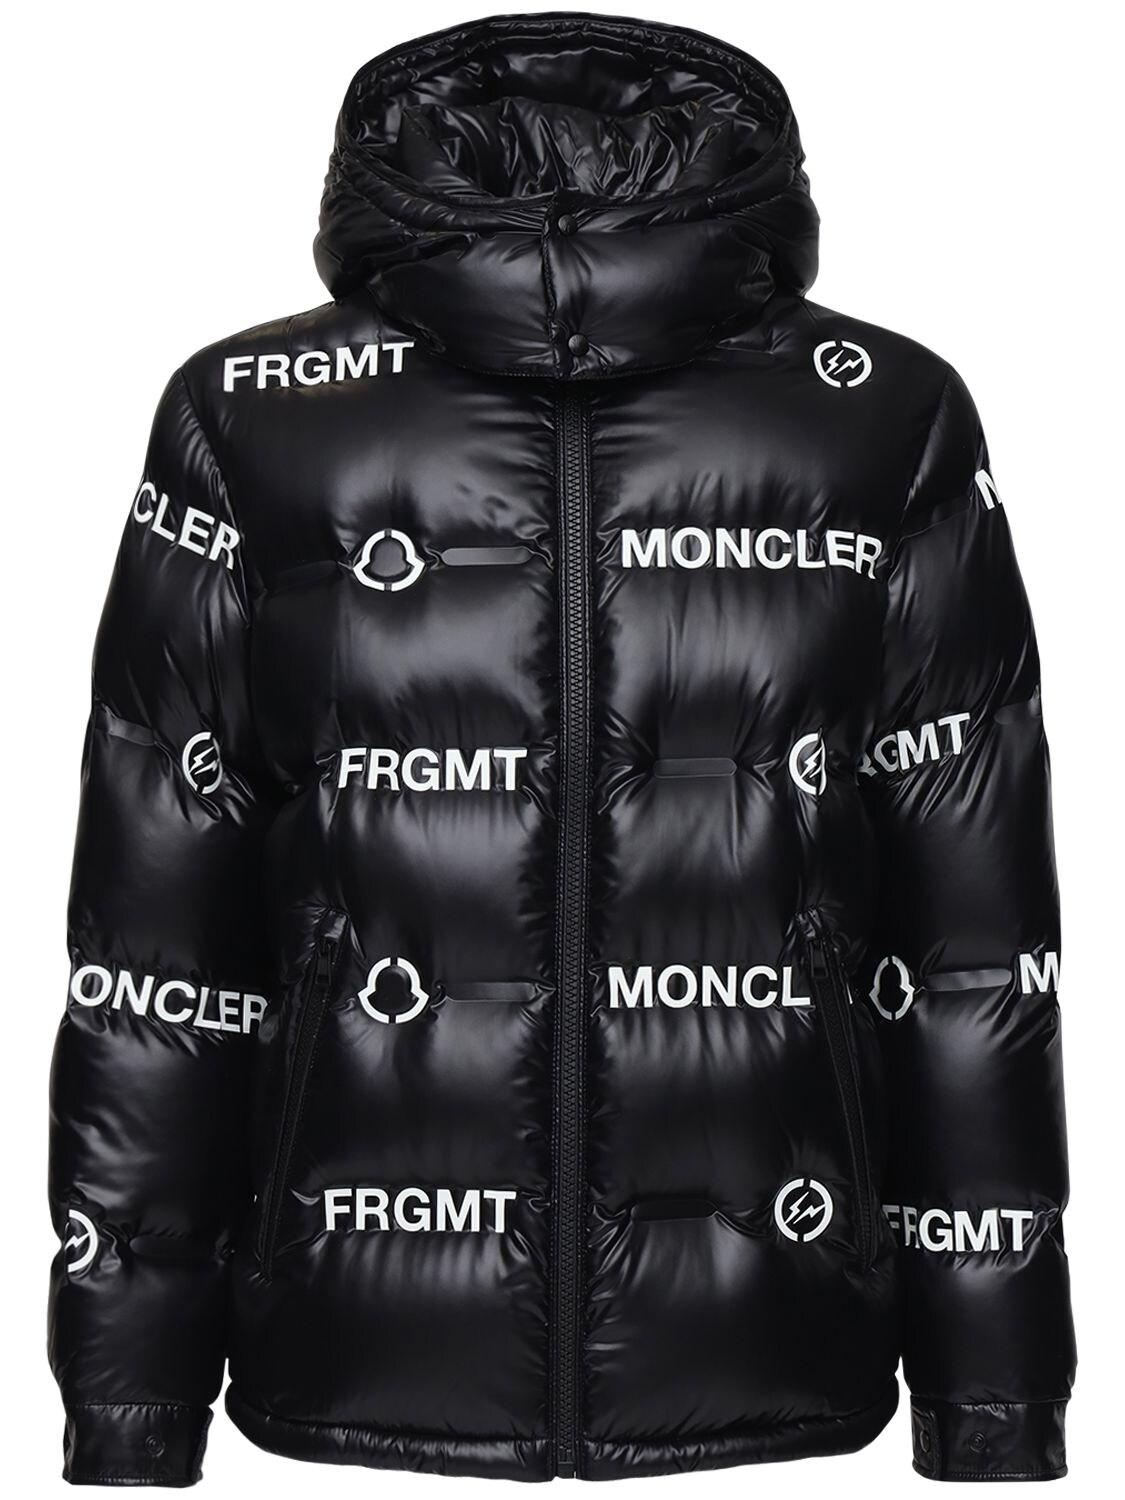 Moncler Genius Synthetic Fragment Mayconne Nylon Down Jacket in Black for Men - Lyst